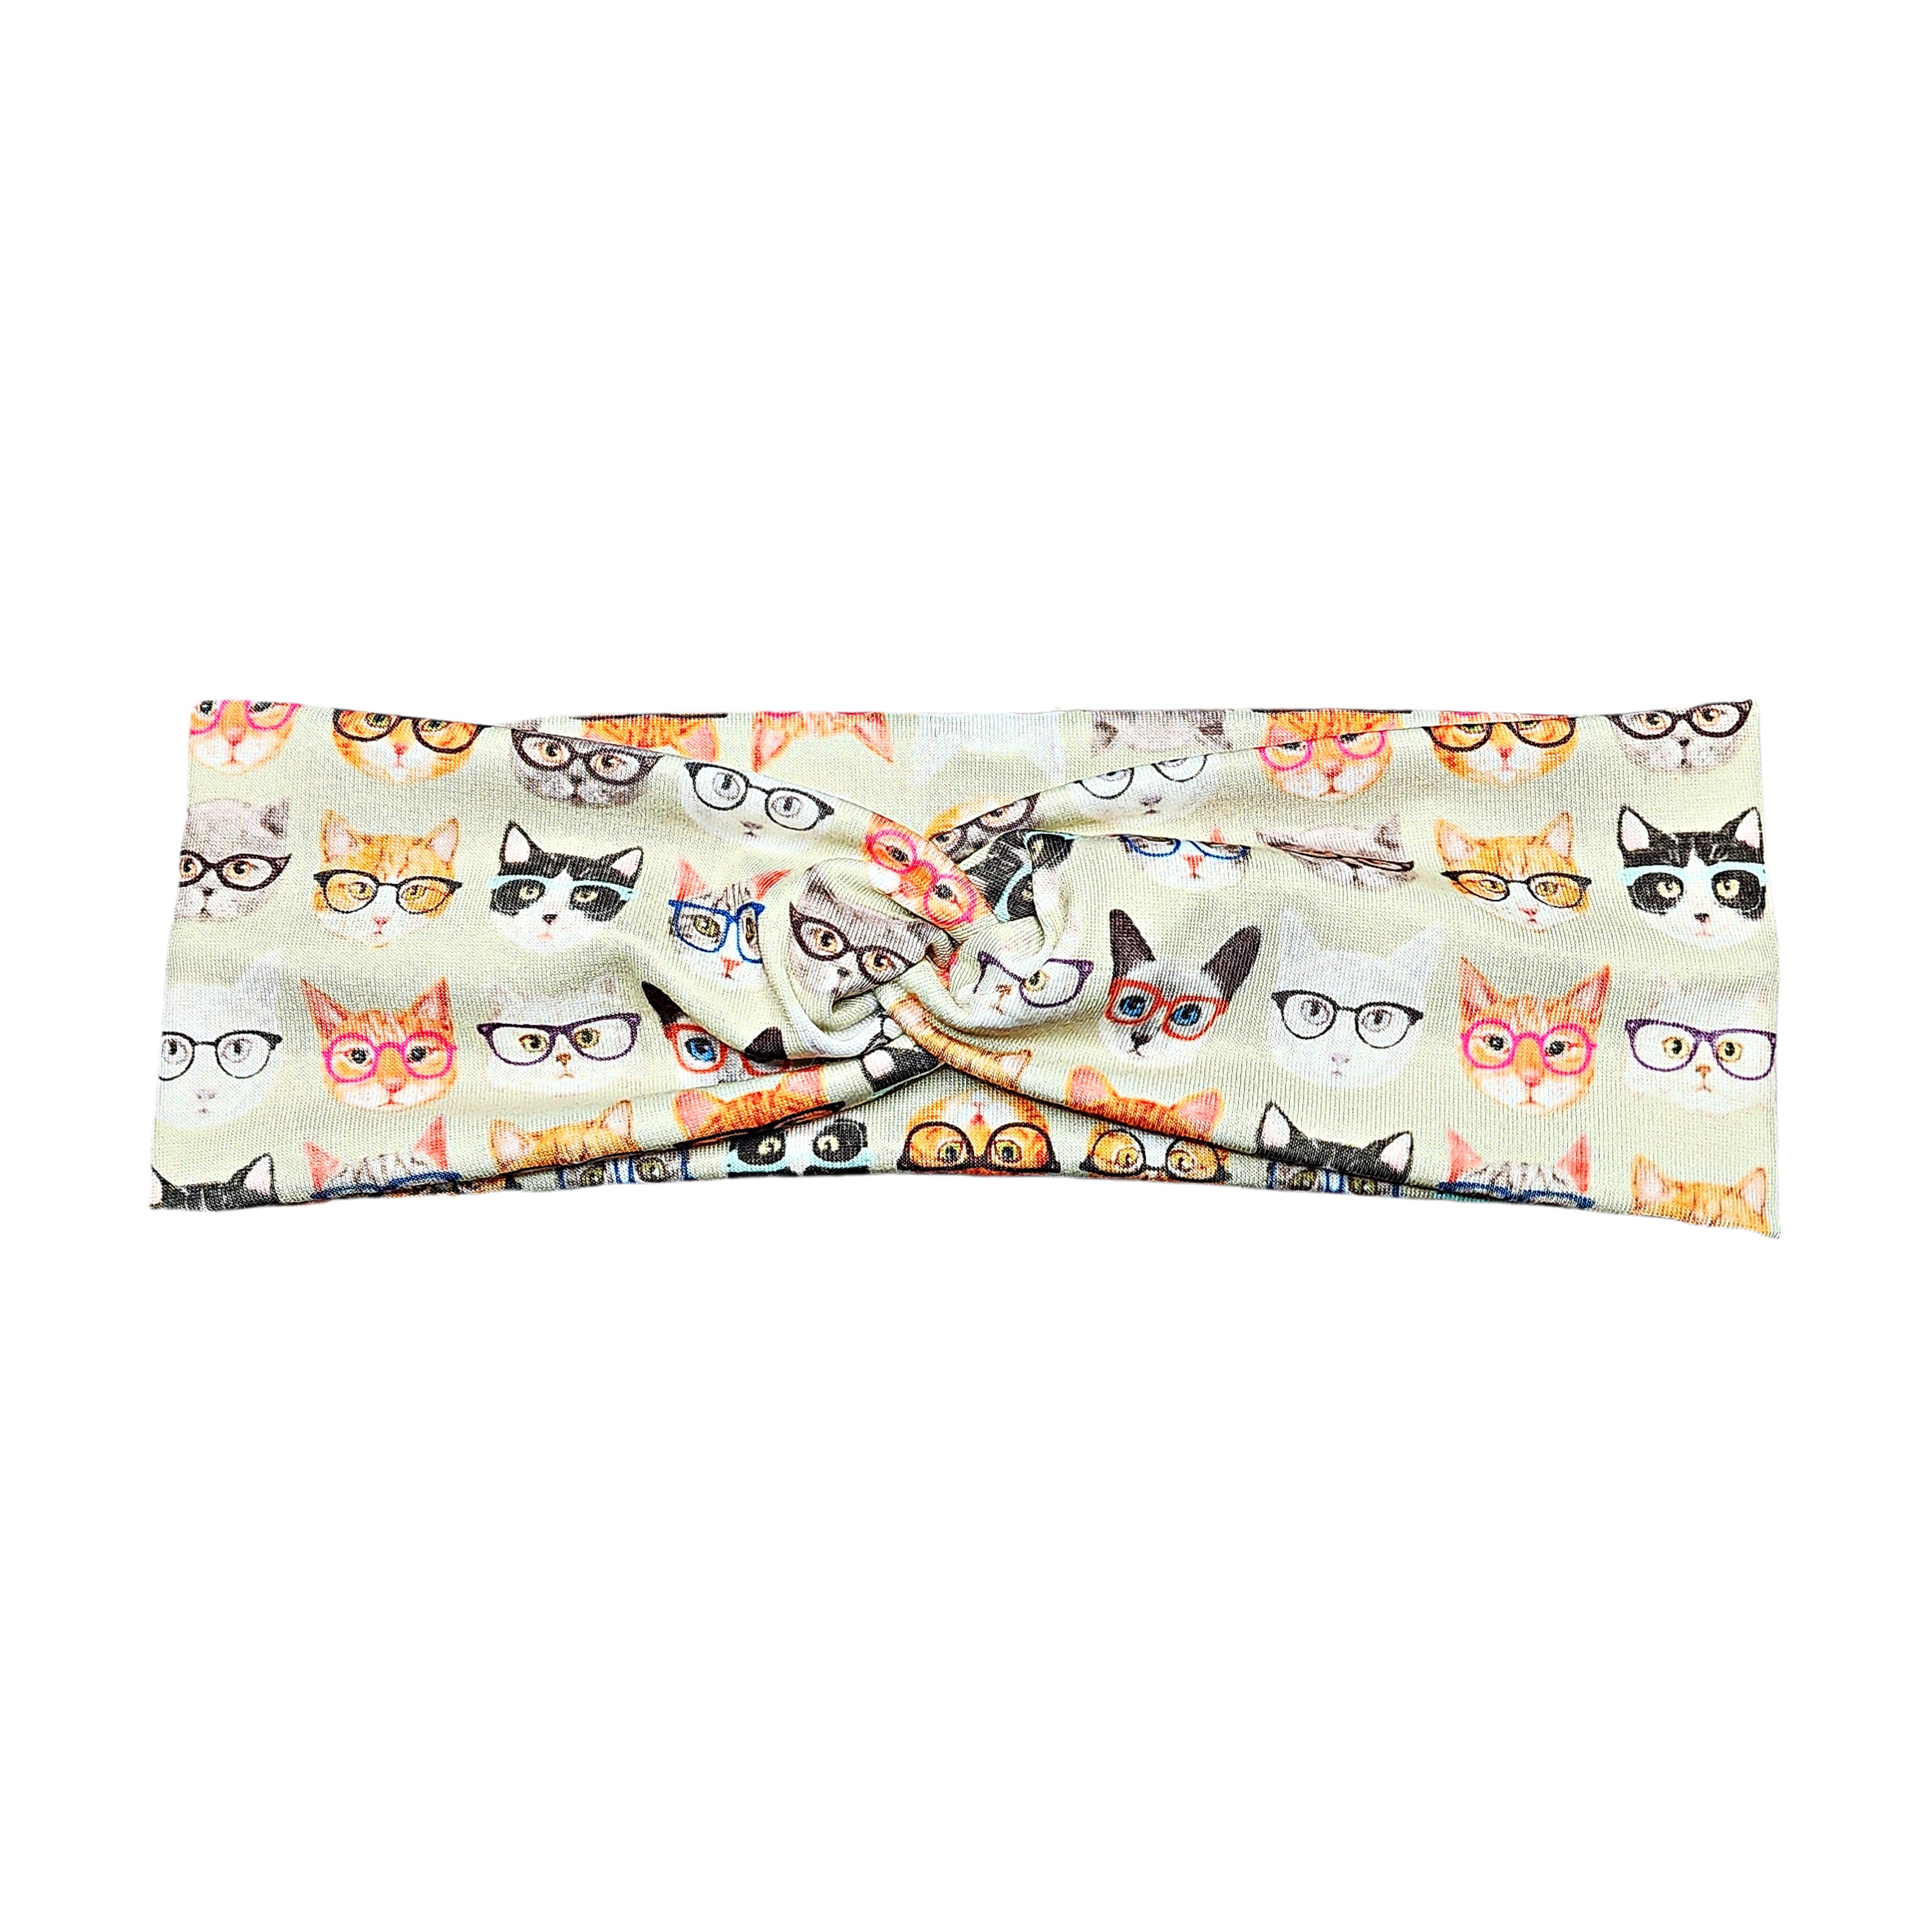 Cats in glasses headband for women and girls